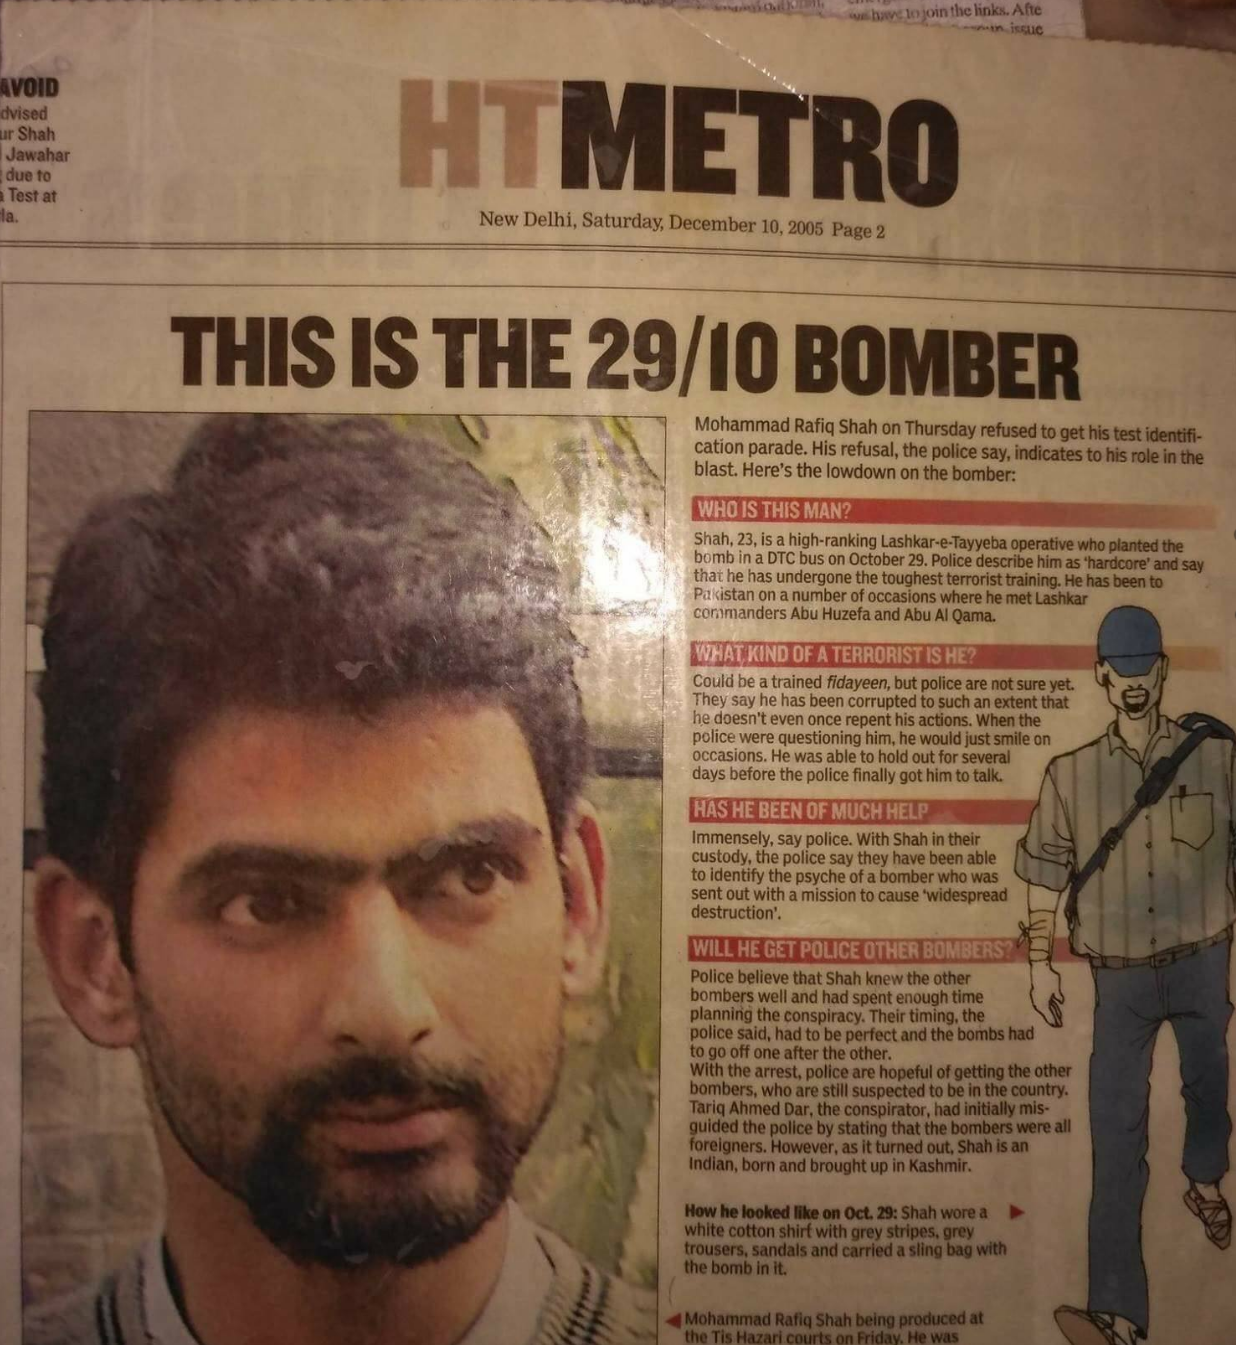 Mohammaed Rafiq Shah being declared as the 29/10 bomber by Hindustan Times